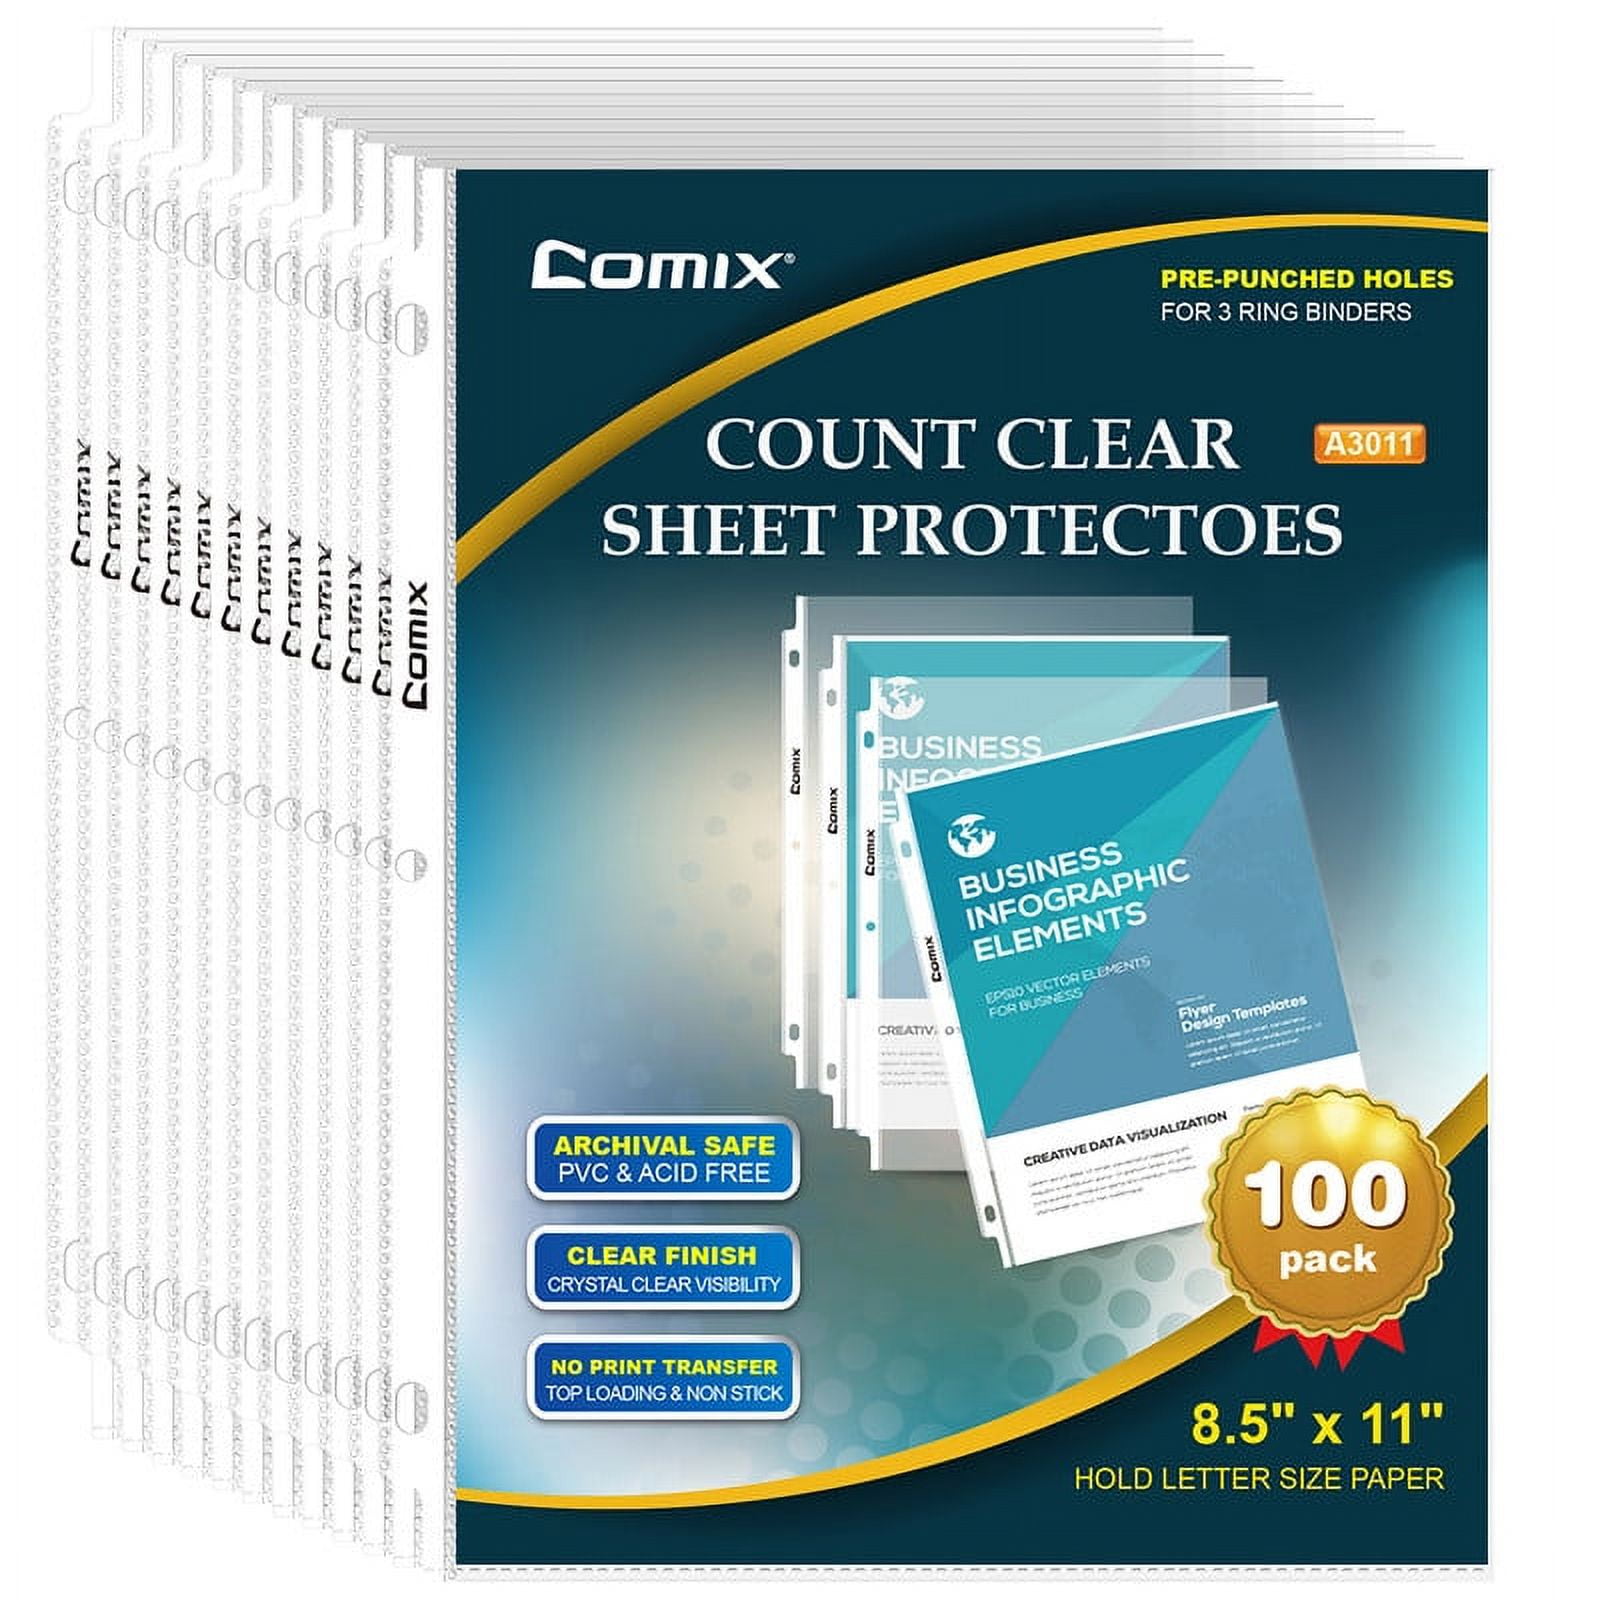 Comix 500-Pack Clear Sheet Protectors for 3 Ring Binders, Plastic Sleeves  for Binders, Fit Letter Size Paper, Top Loading 